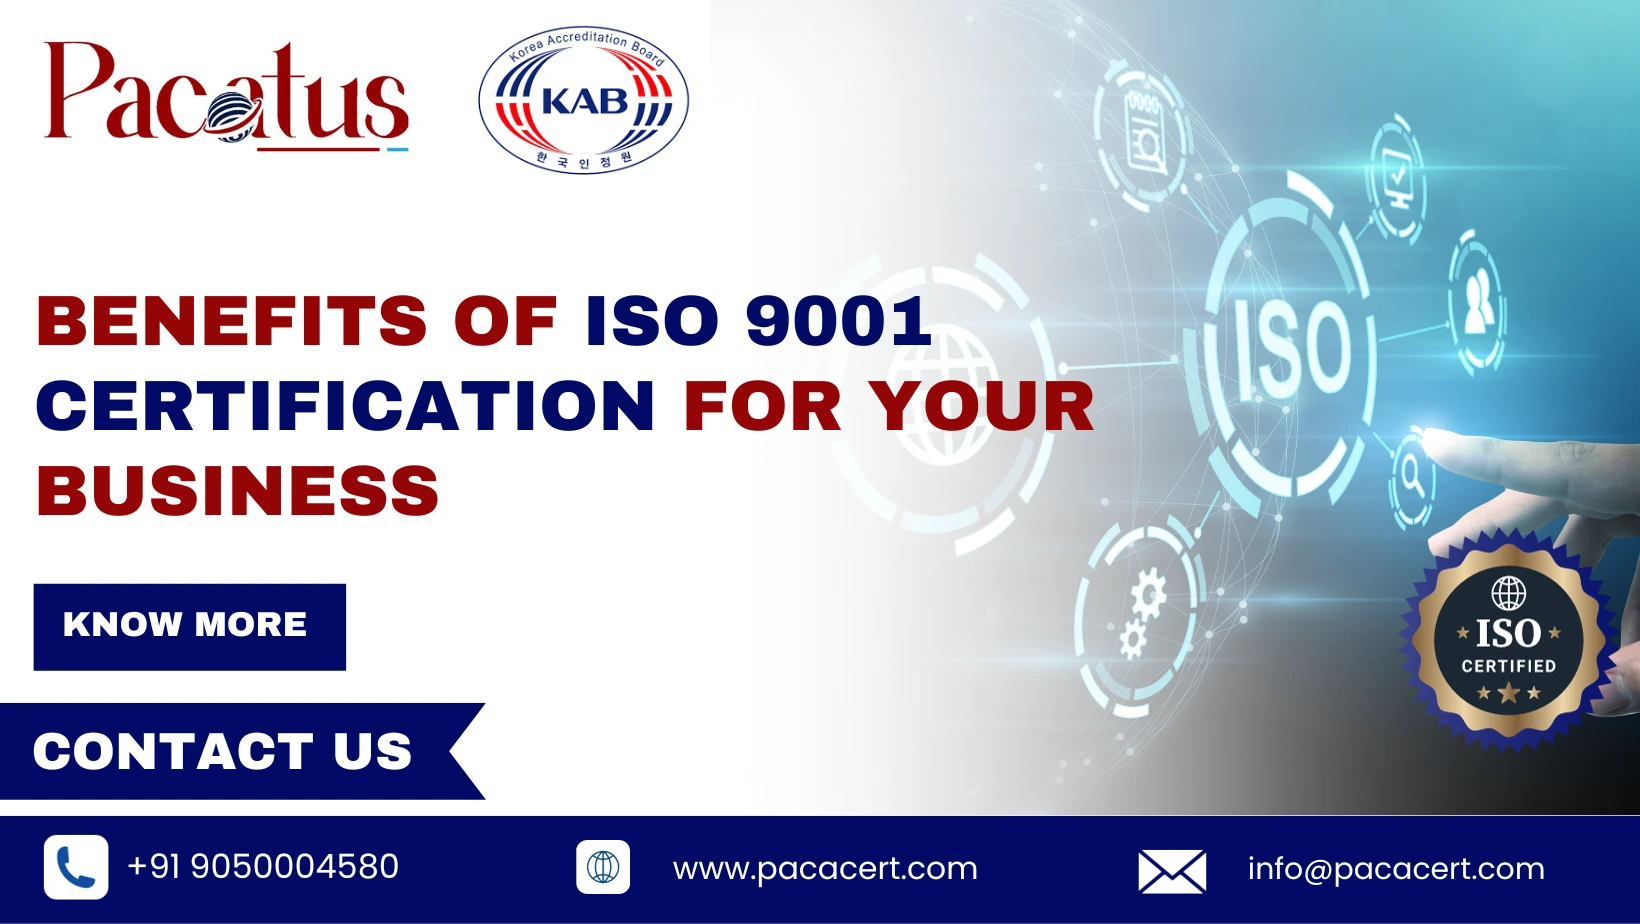 Benefits of ISO 9001 certification